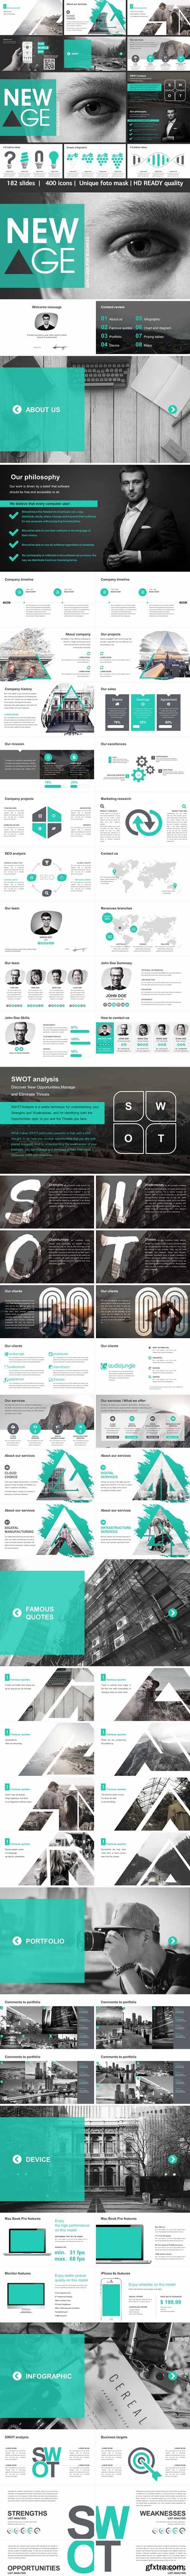 Graphicriver New Age Creative GoogleSlides Template 19001843